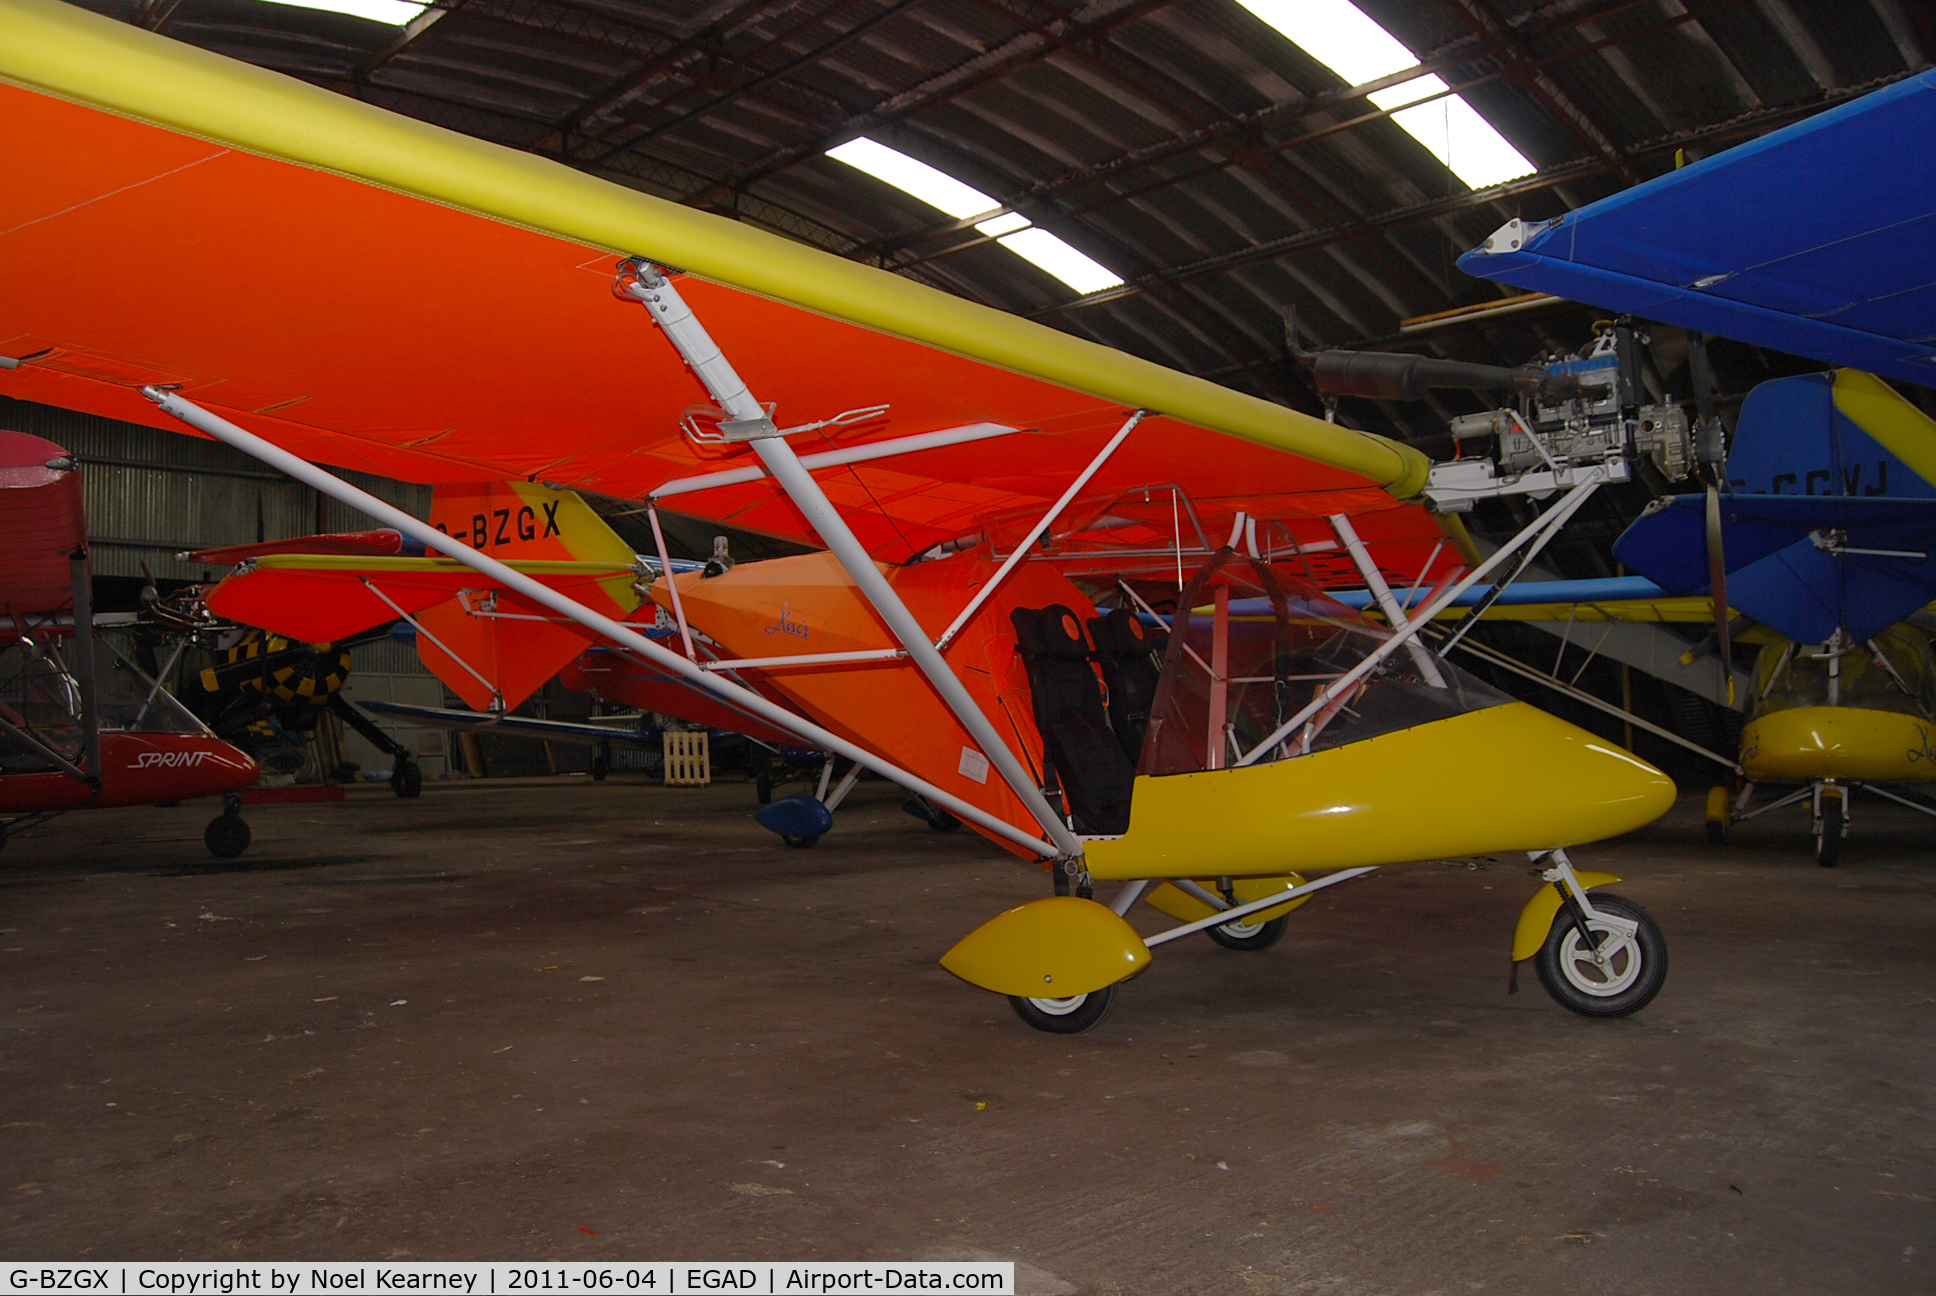 G-BZGX, 2002 X'Air 582(6) C/N BMAA/HB/099, In the hanger at Newtownards during Fly-in 2011.